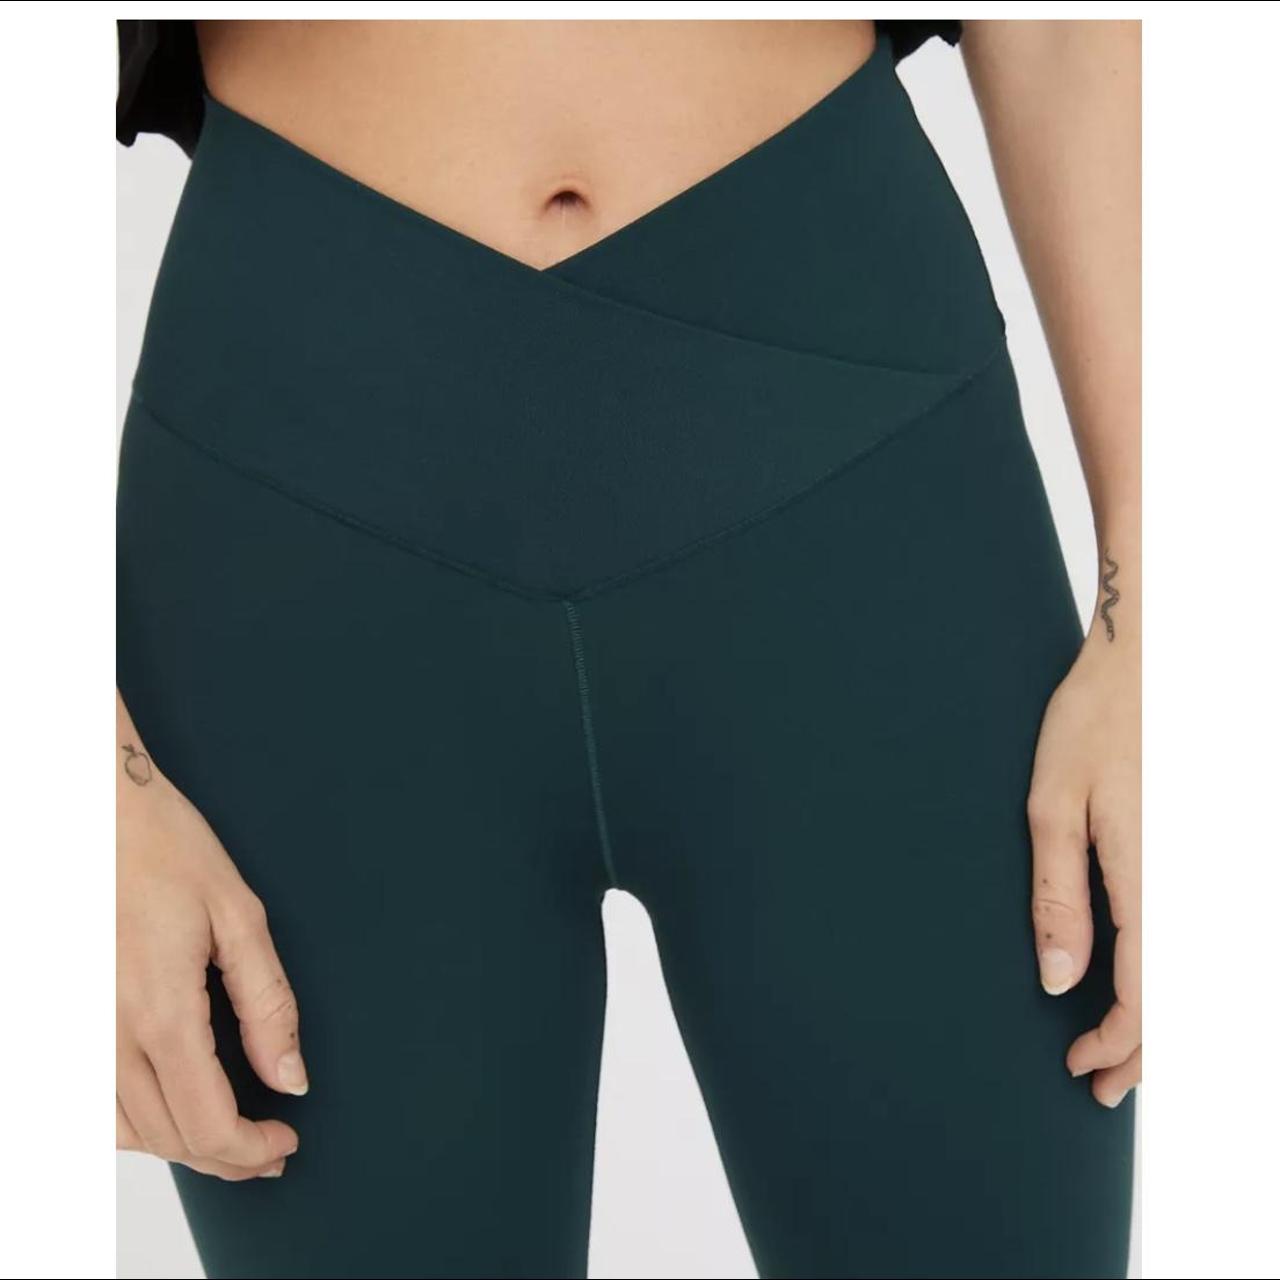 Aerie NWT Green Flare Leggings - $20 (66% Off Retail) New With Tags - From  Destiny